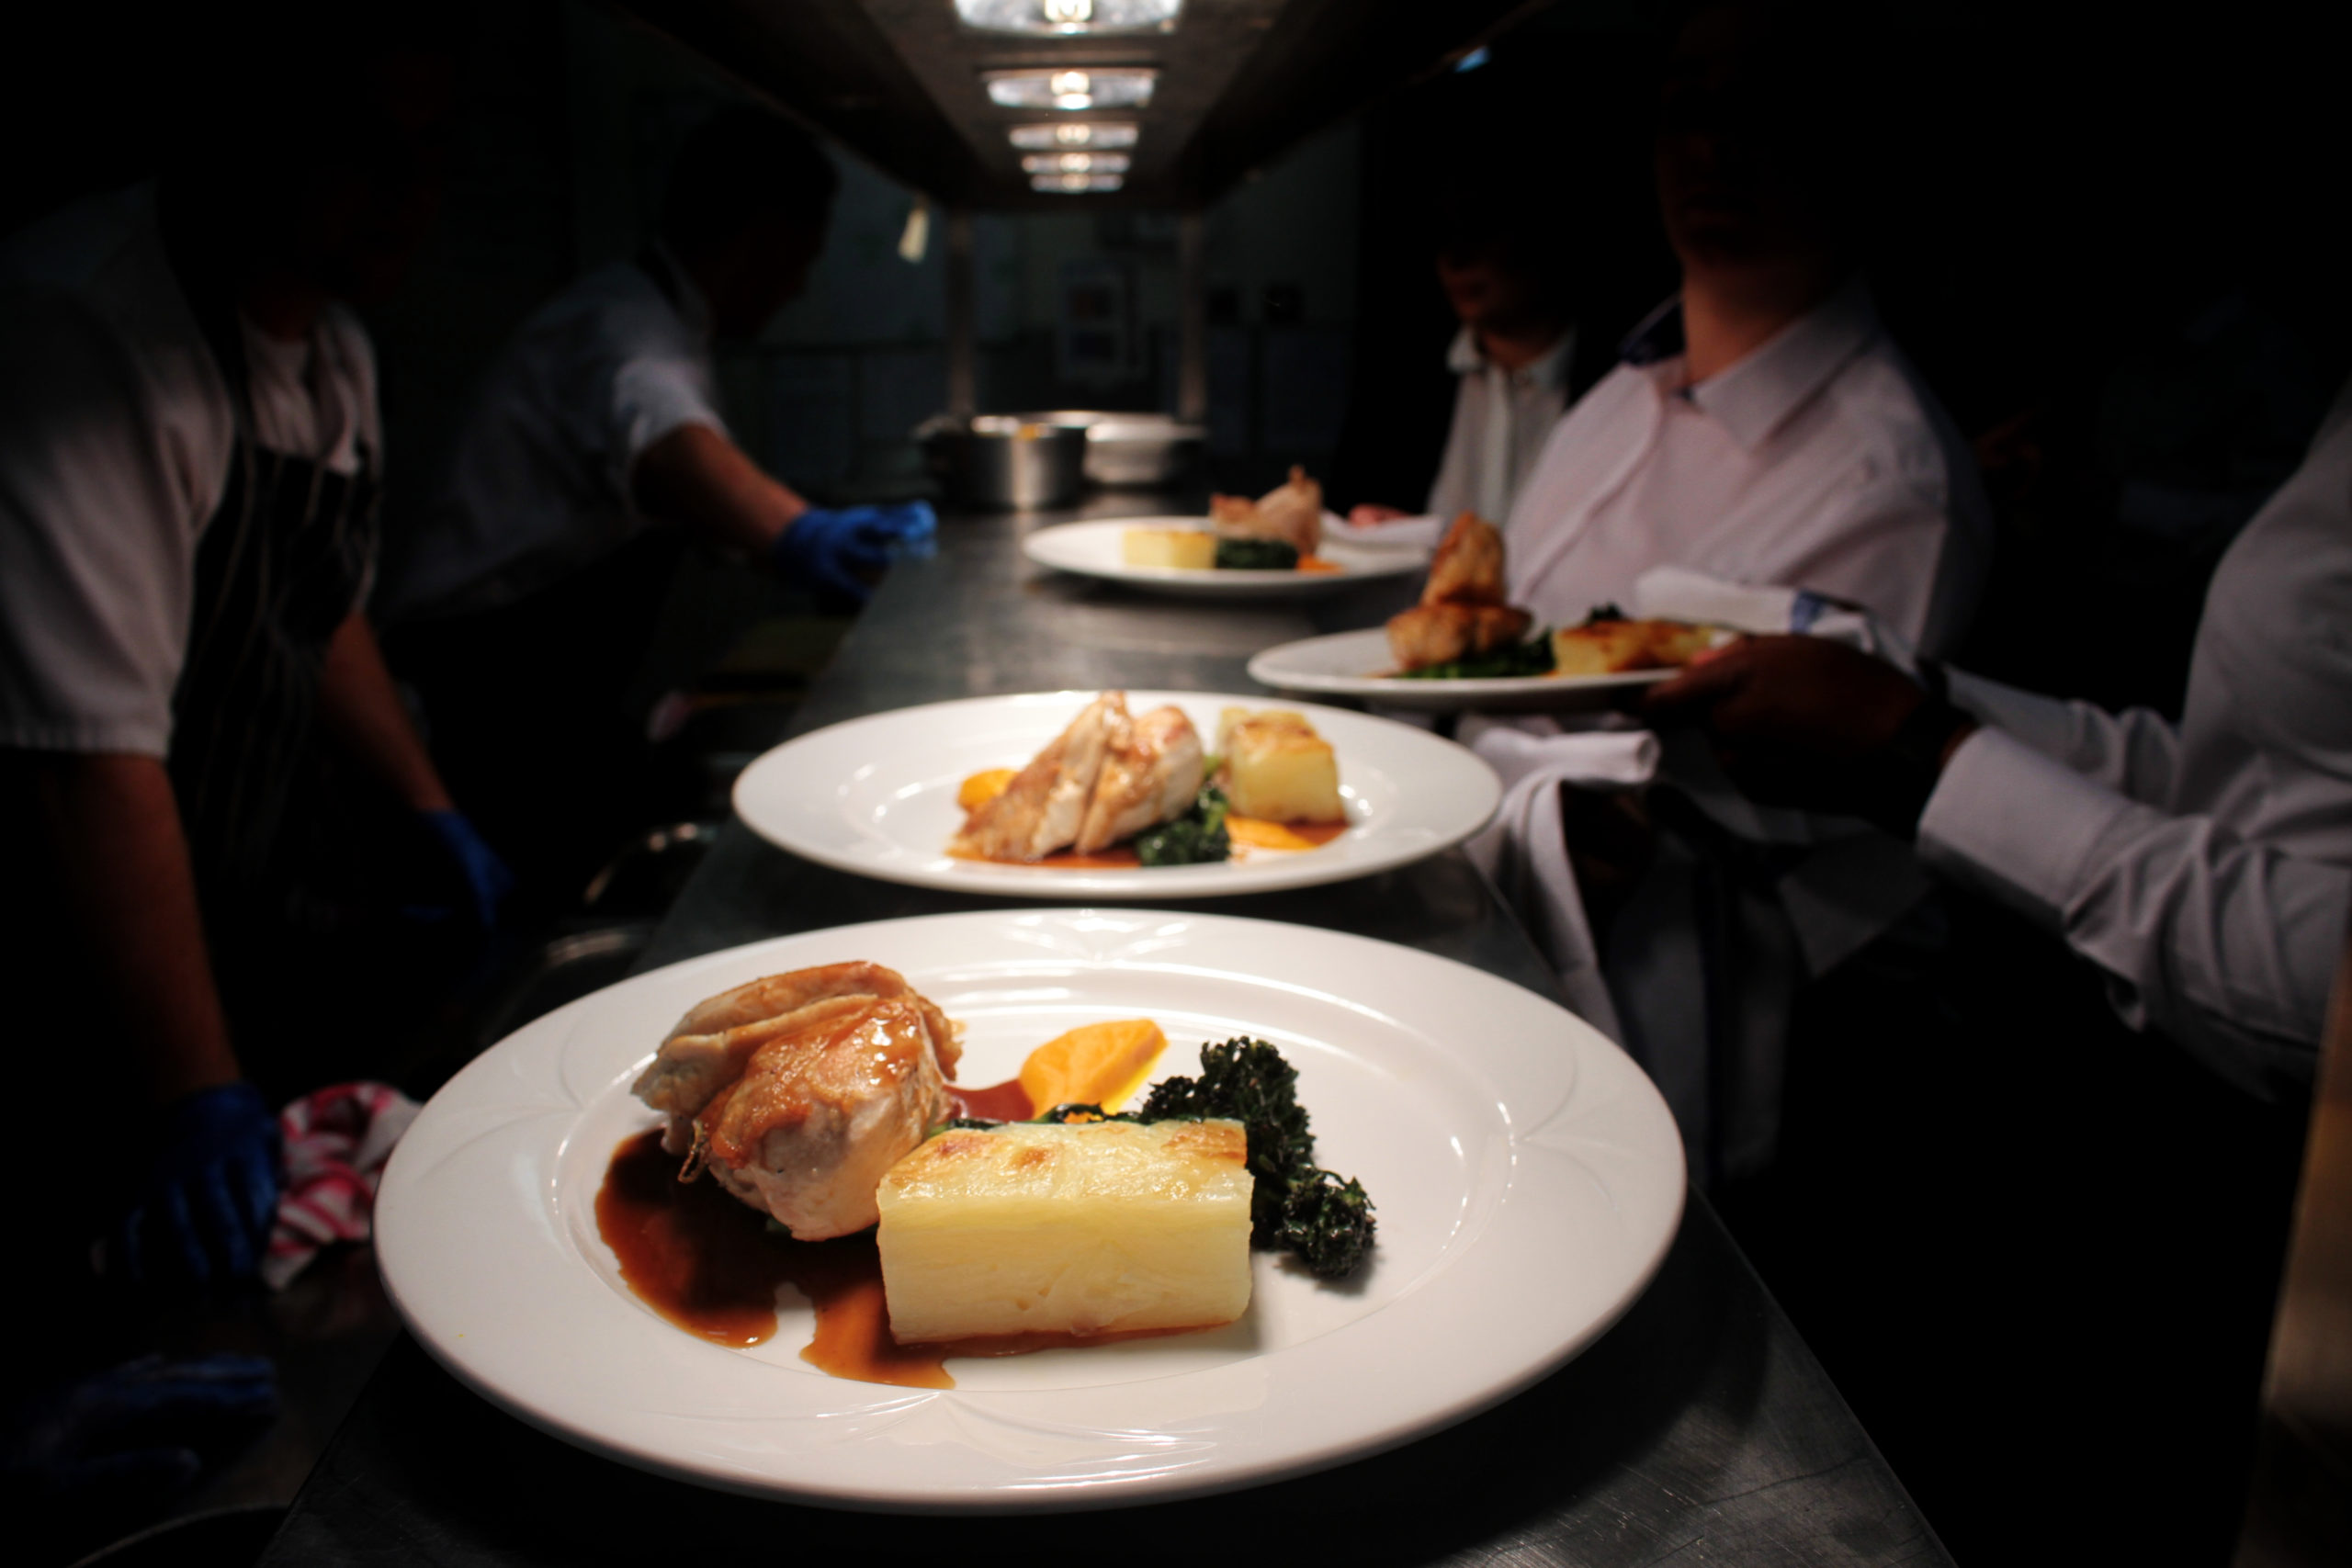 plated food being kept warm in kitchen